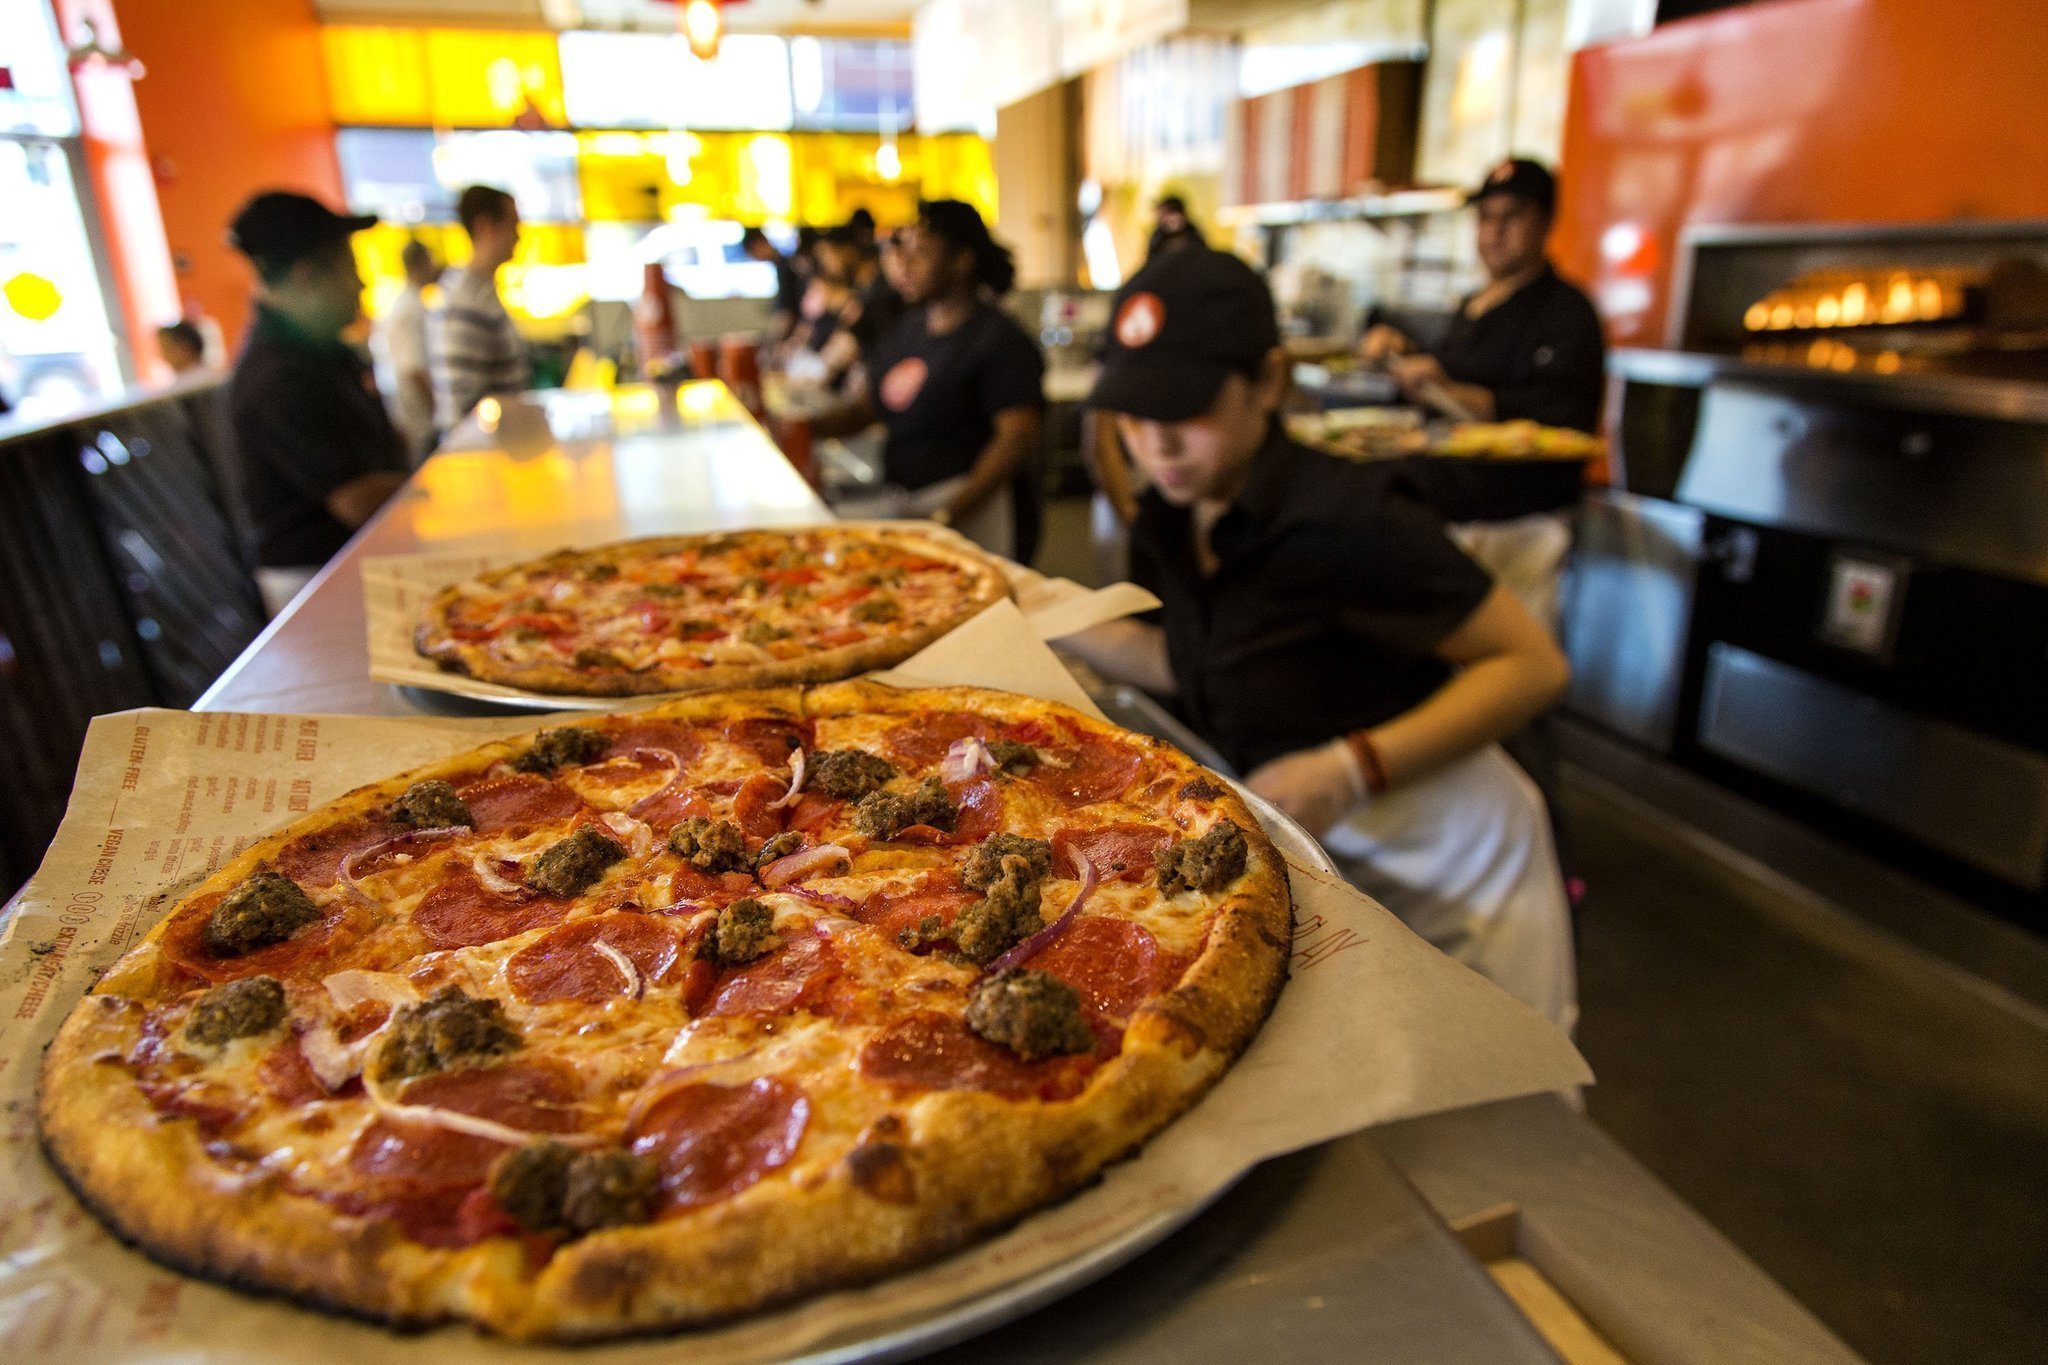 Blaze Pizza giving away free pies with restaurant opening ...